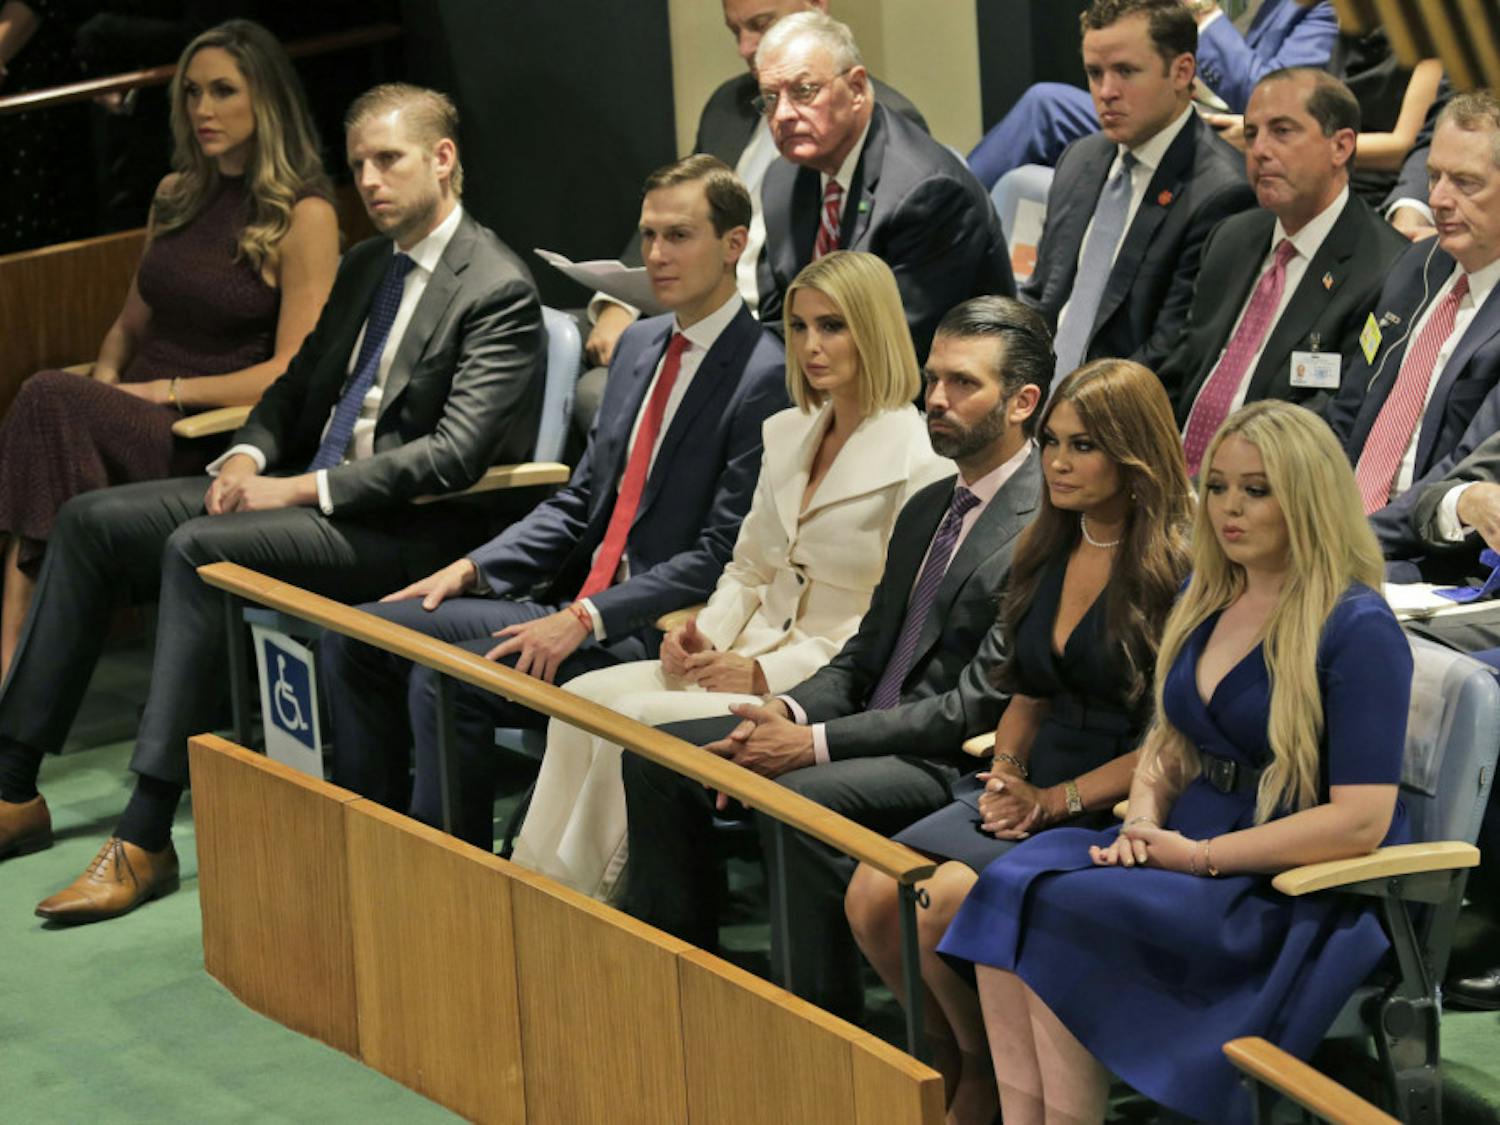 Members of U.S. President Donald Trump's family and others listen to him speak during the 74th session of the United Nations General Assembly at U.N. headquarters Tuesday, Sept. 24, 2019. From right to left, Tiffany Trump, Kimberly Guilfoyle, Donald Trump Jr., Ivanka Trump, Jared Kushner, Eric Trump and Lara Trump. (AP Photo/Seth Wenig)